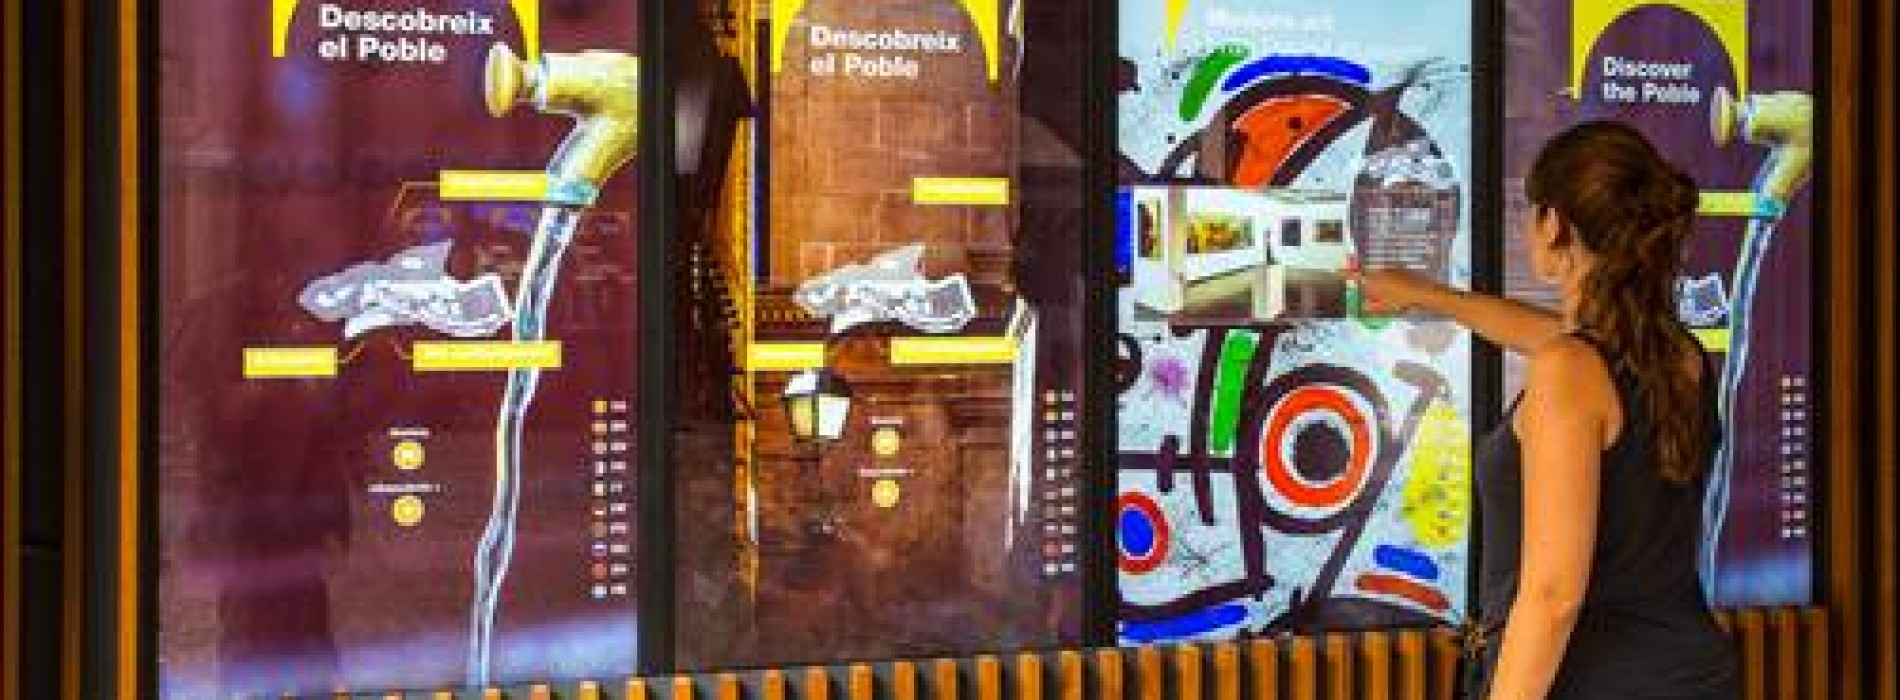 Modernization and Multimedia Project Installations at Poble Espanyol Barcelona